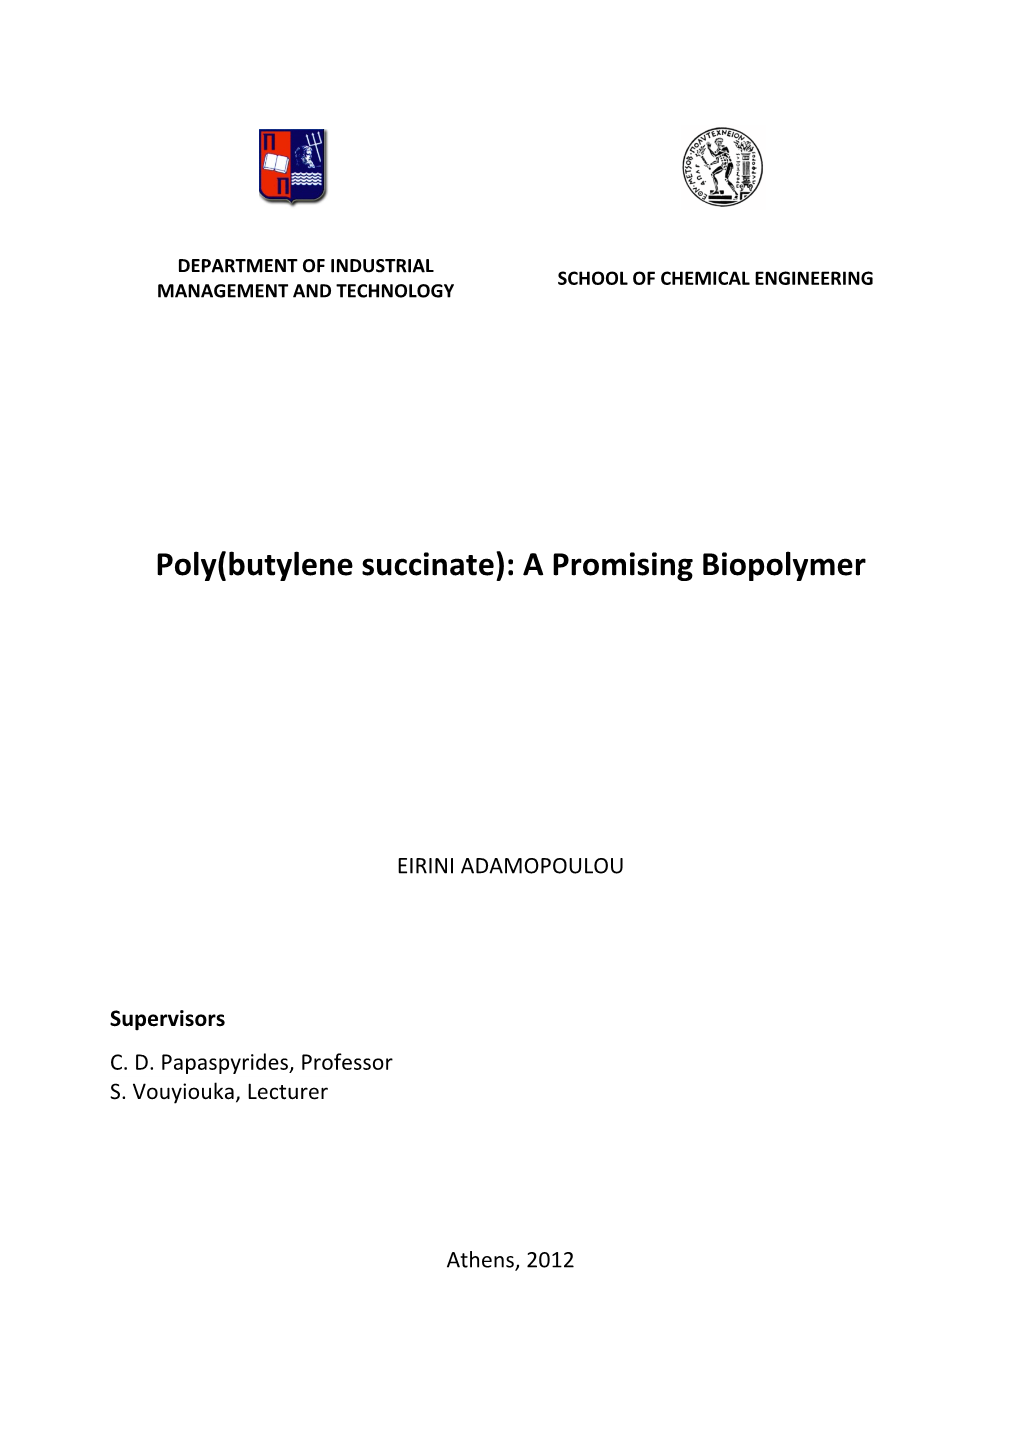 Poly(Butylene Succinate): a Promising Biopolymer